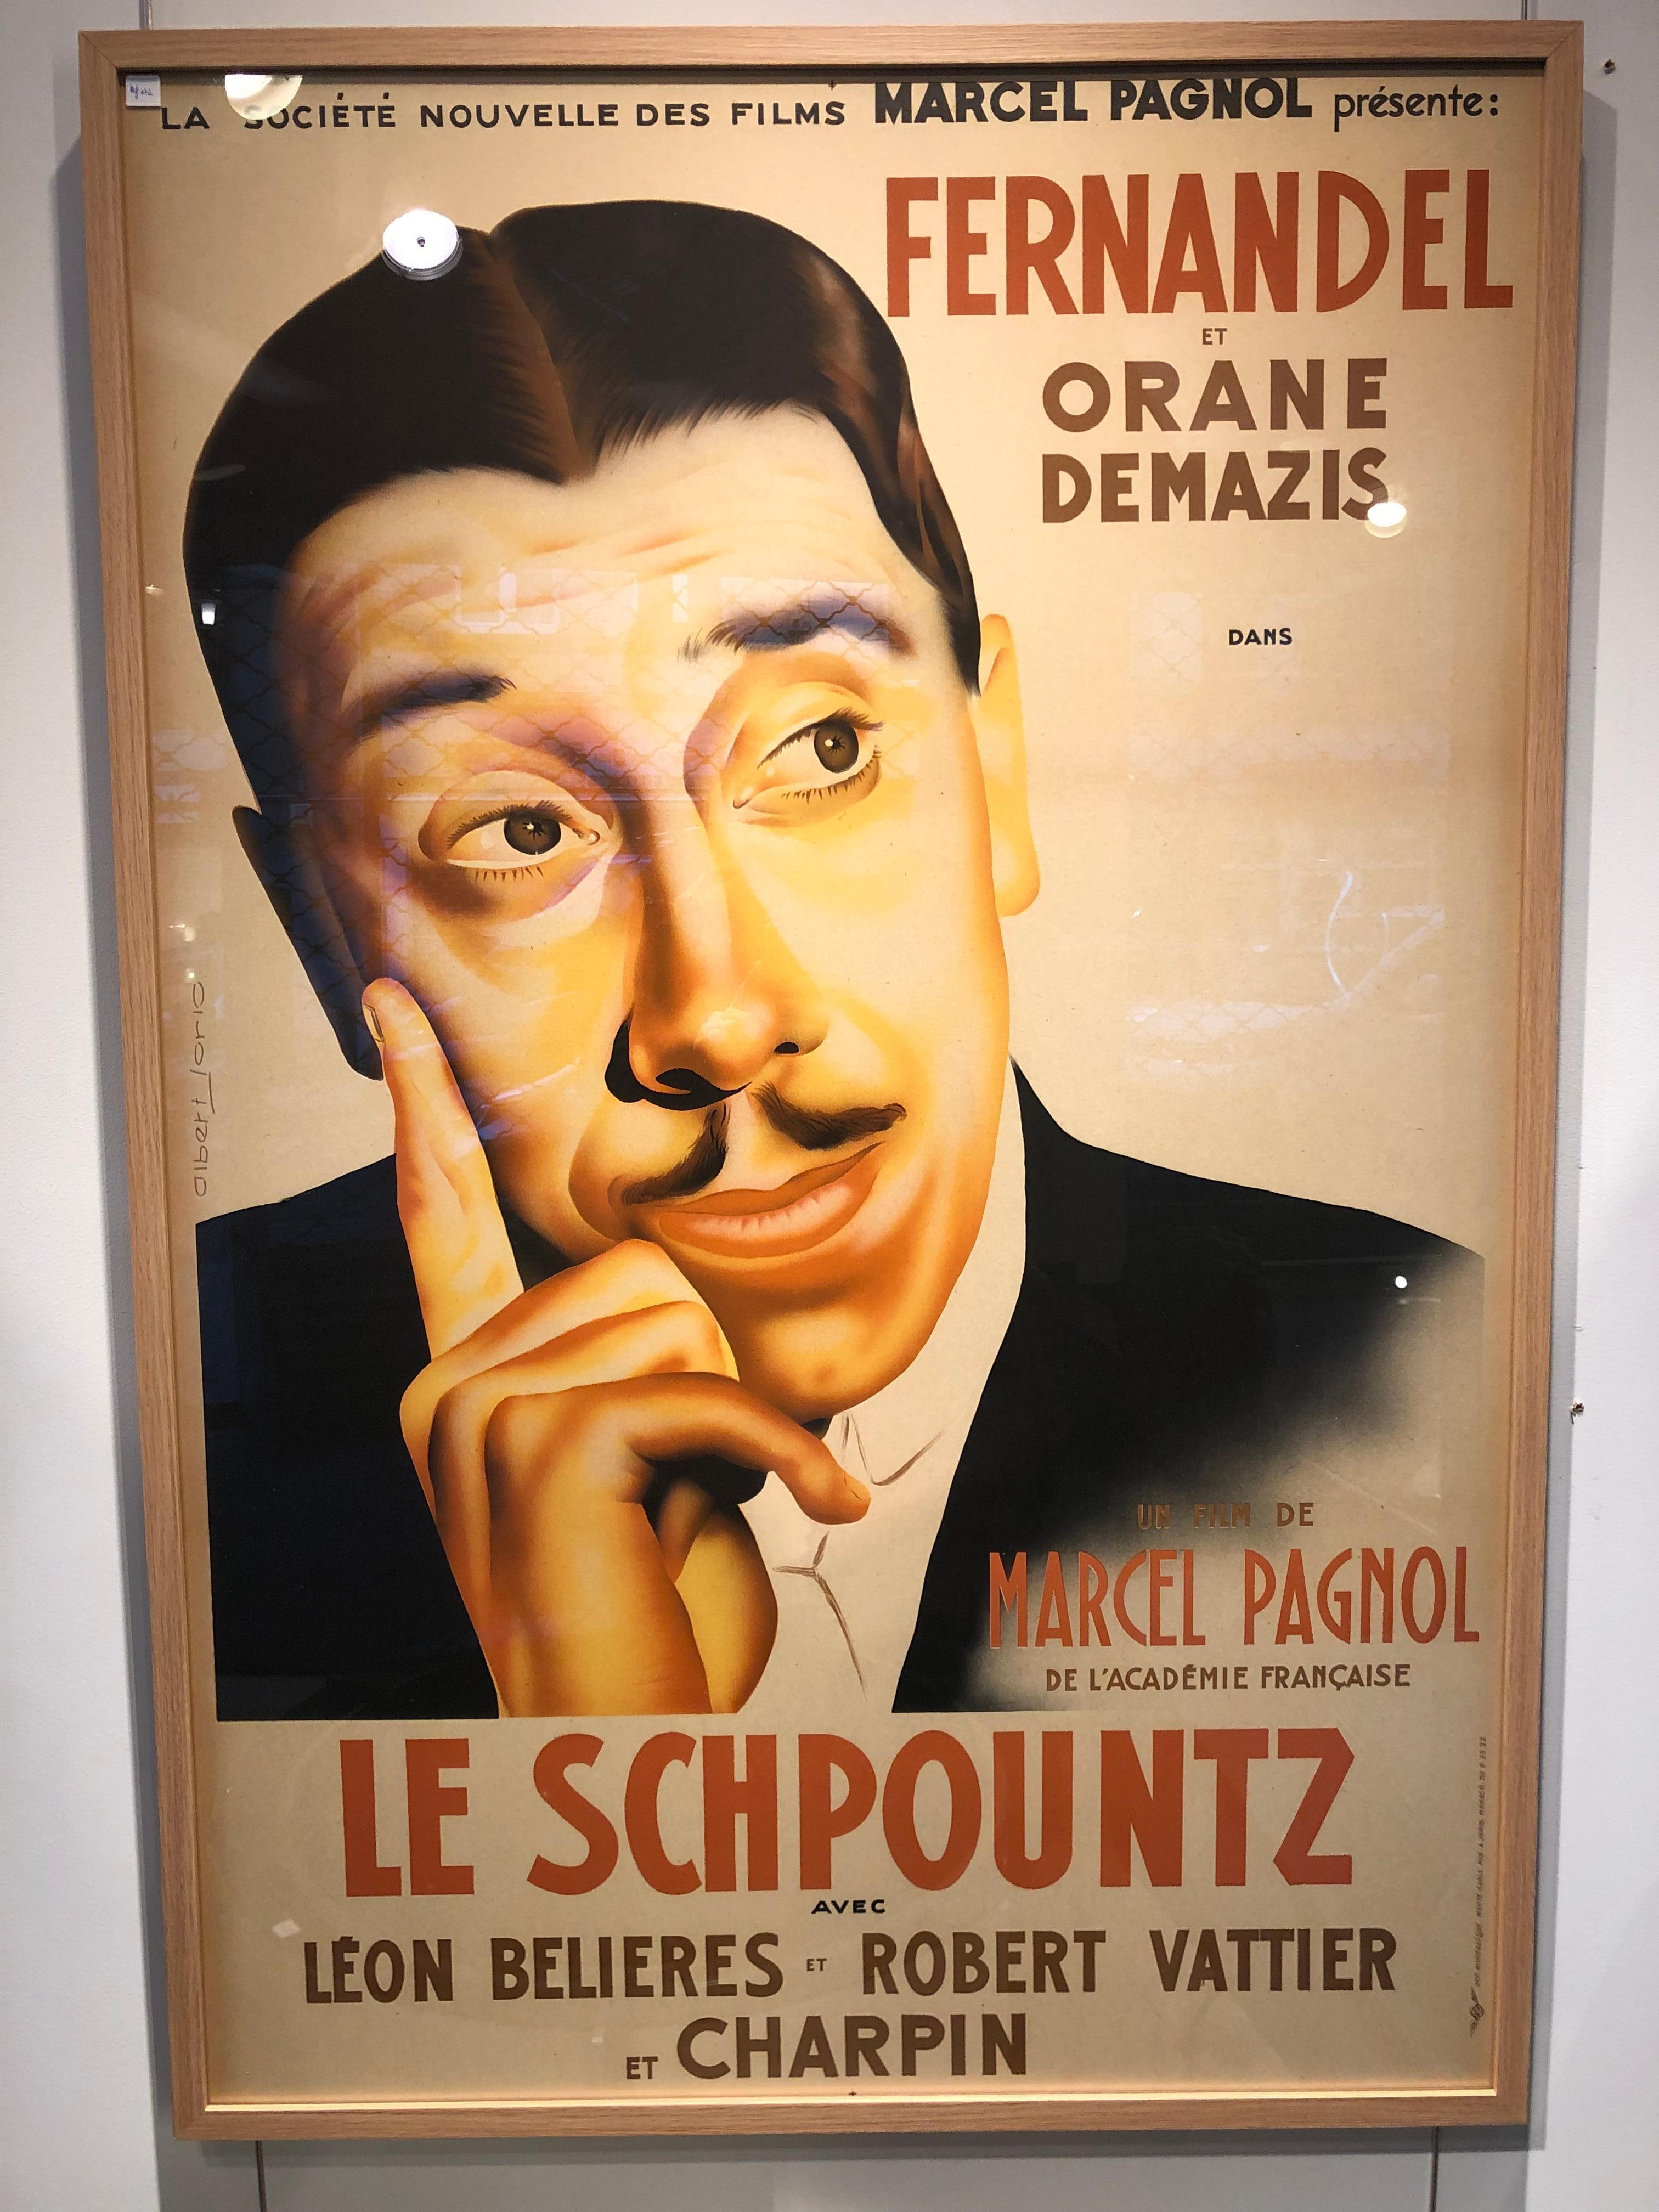 Film poster le Schpountz de Marcel Pagnol with Fernandel from the 40’s 
This film poster is made by Alfred Jorio in imprimerie monégasque Monaco.
 New frame with glass.